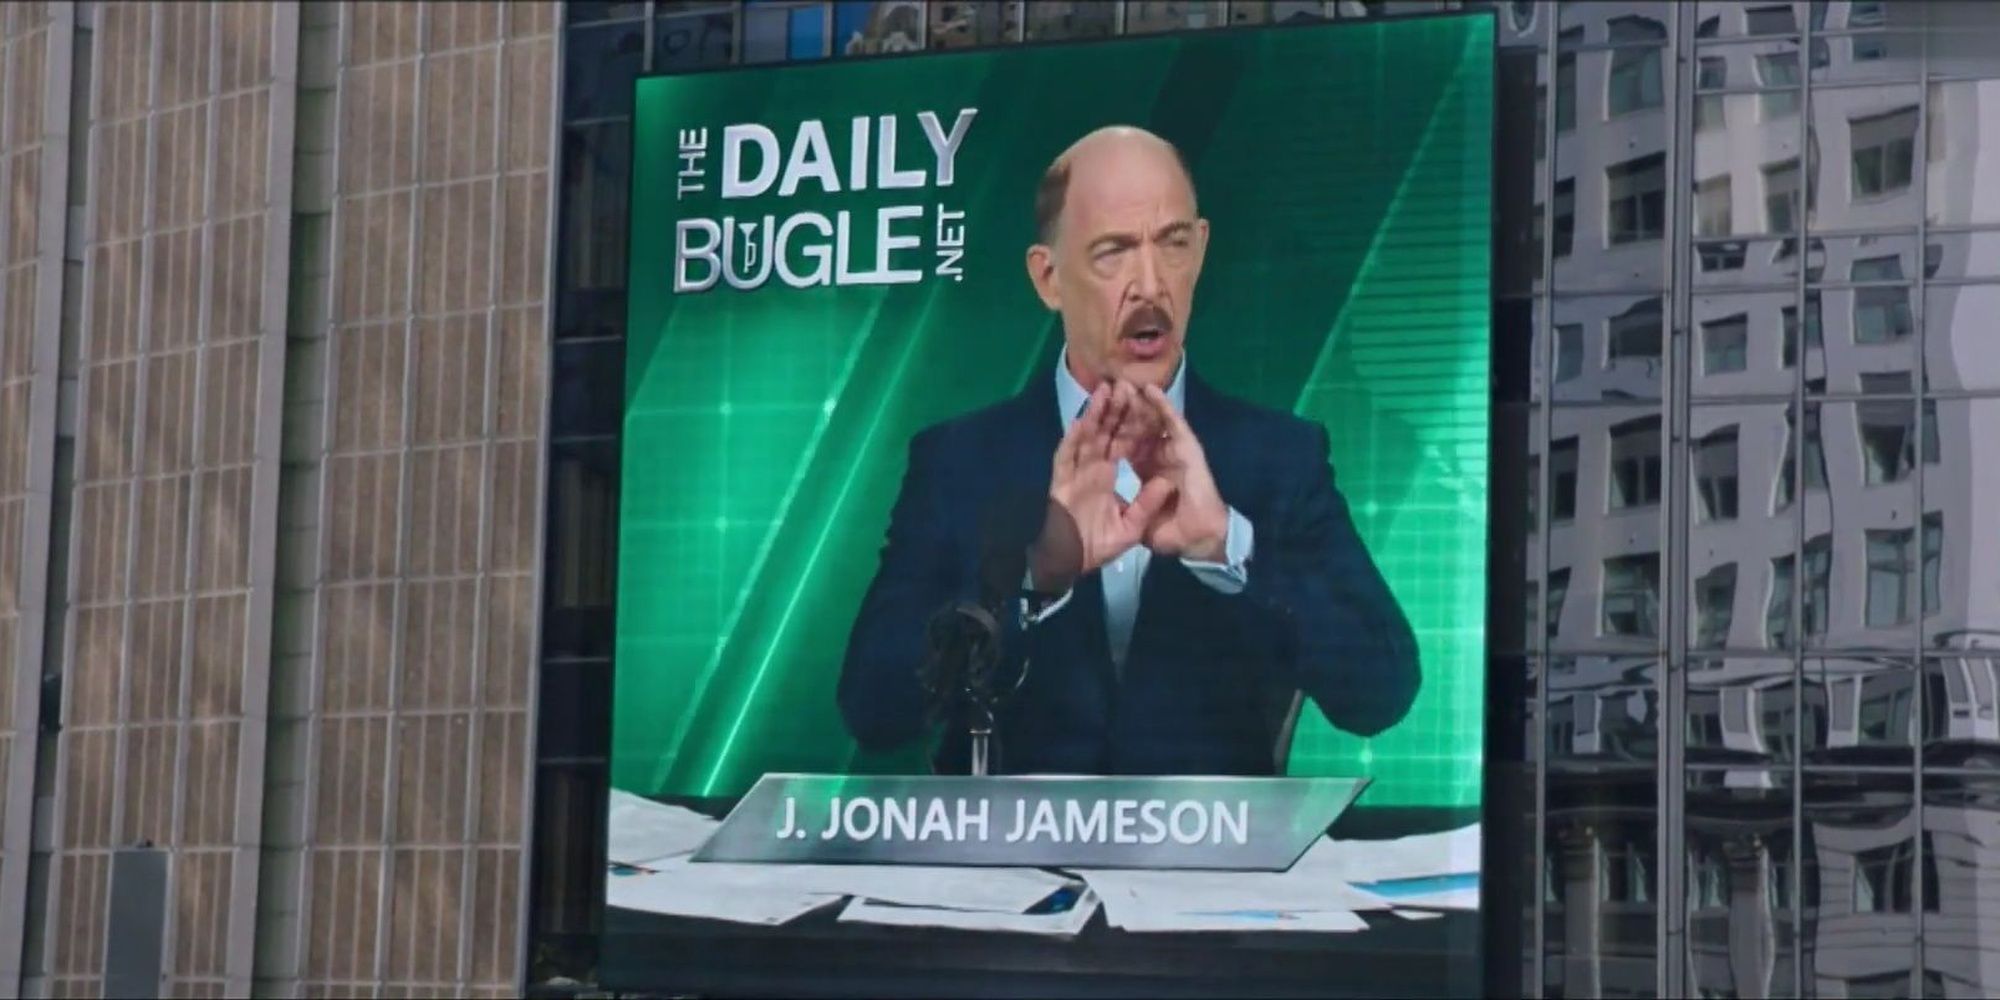 j jonah jameson in far from home on the big screen